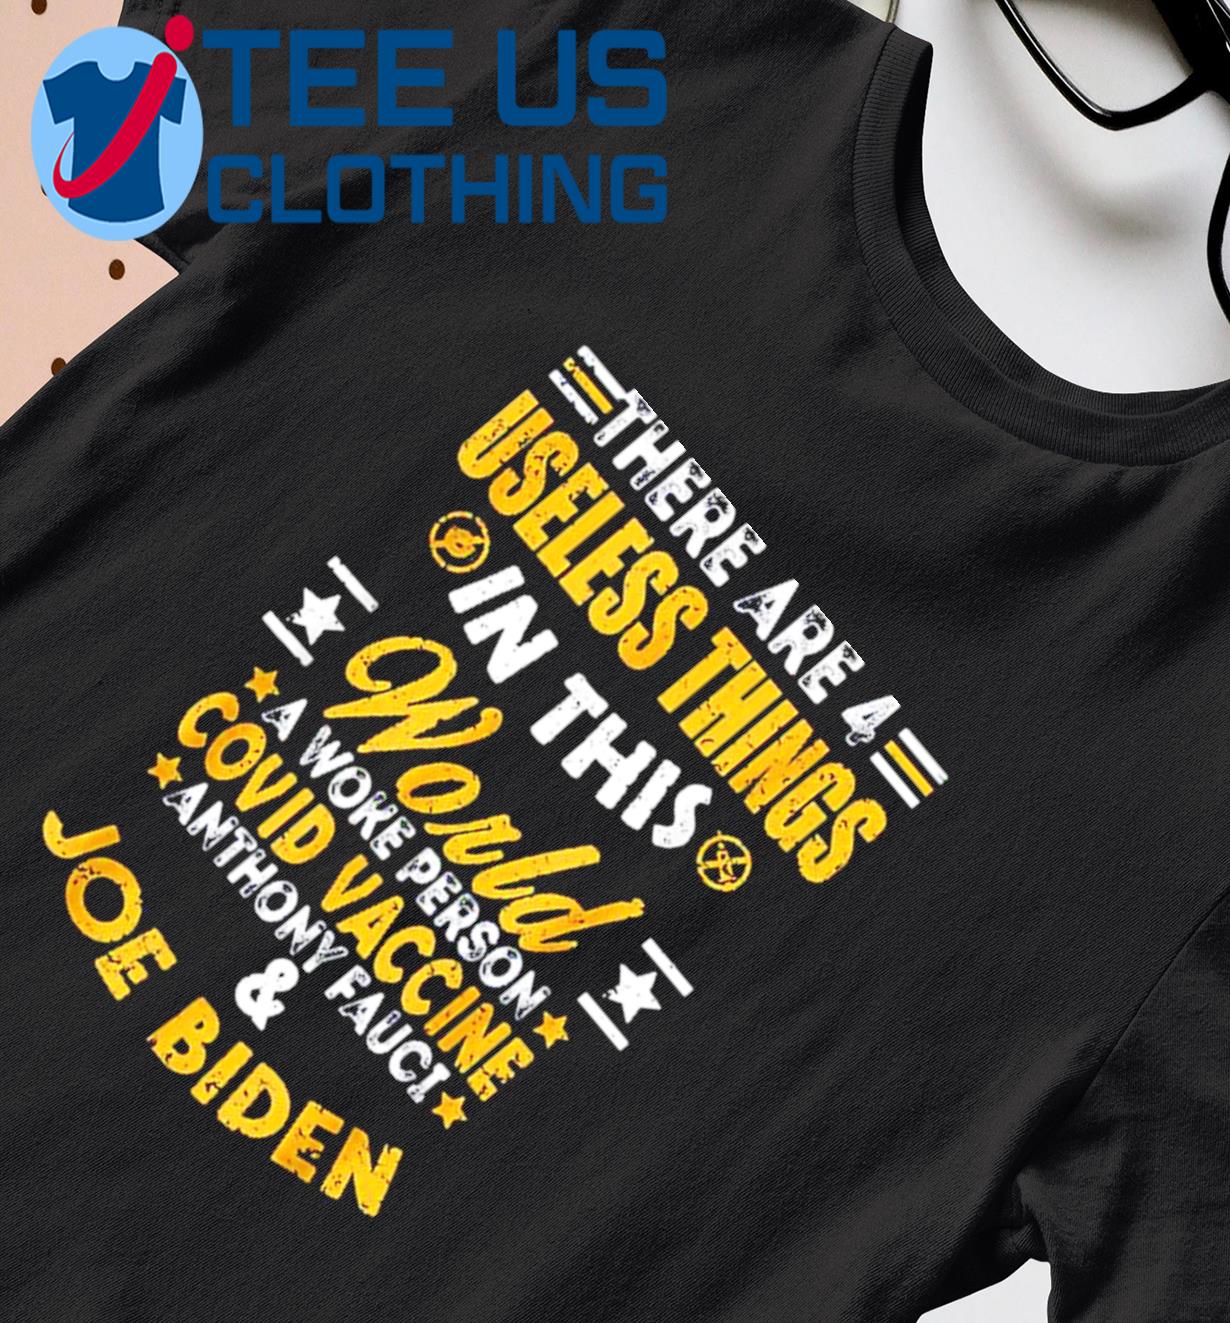 There Are 4 Useless Things In This World A Woke Person Covid Vaccine Anthony Fauci And Joe Biden Shirt